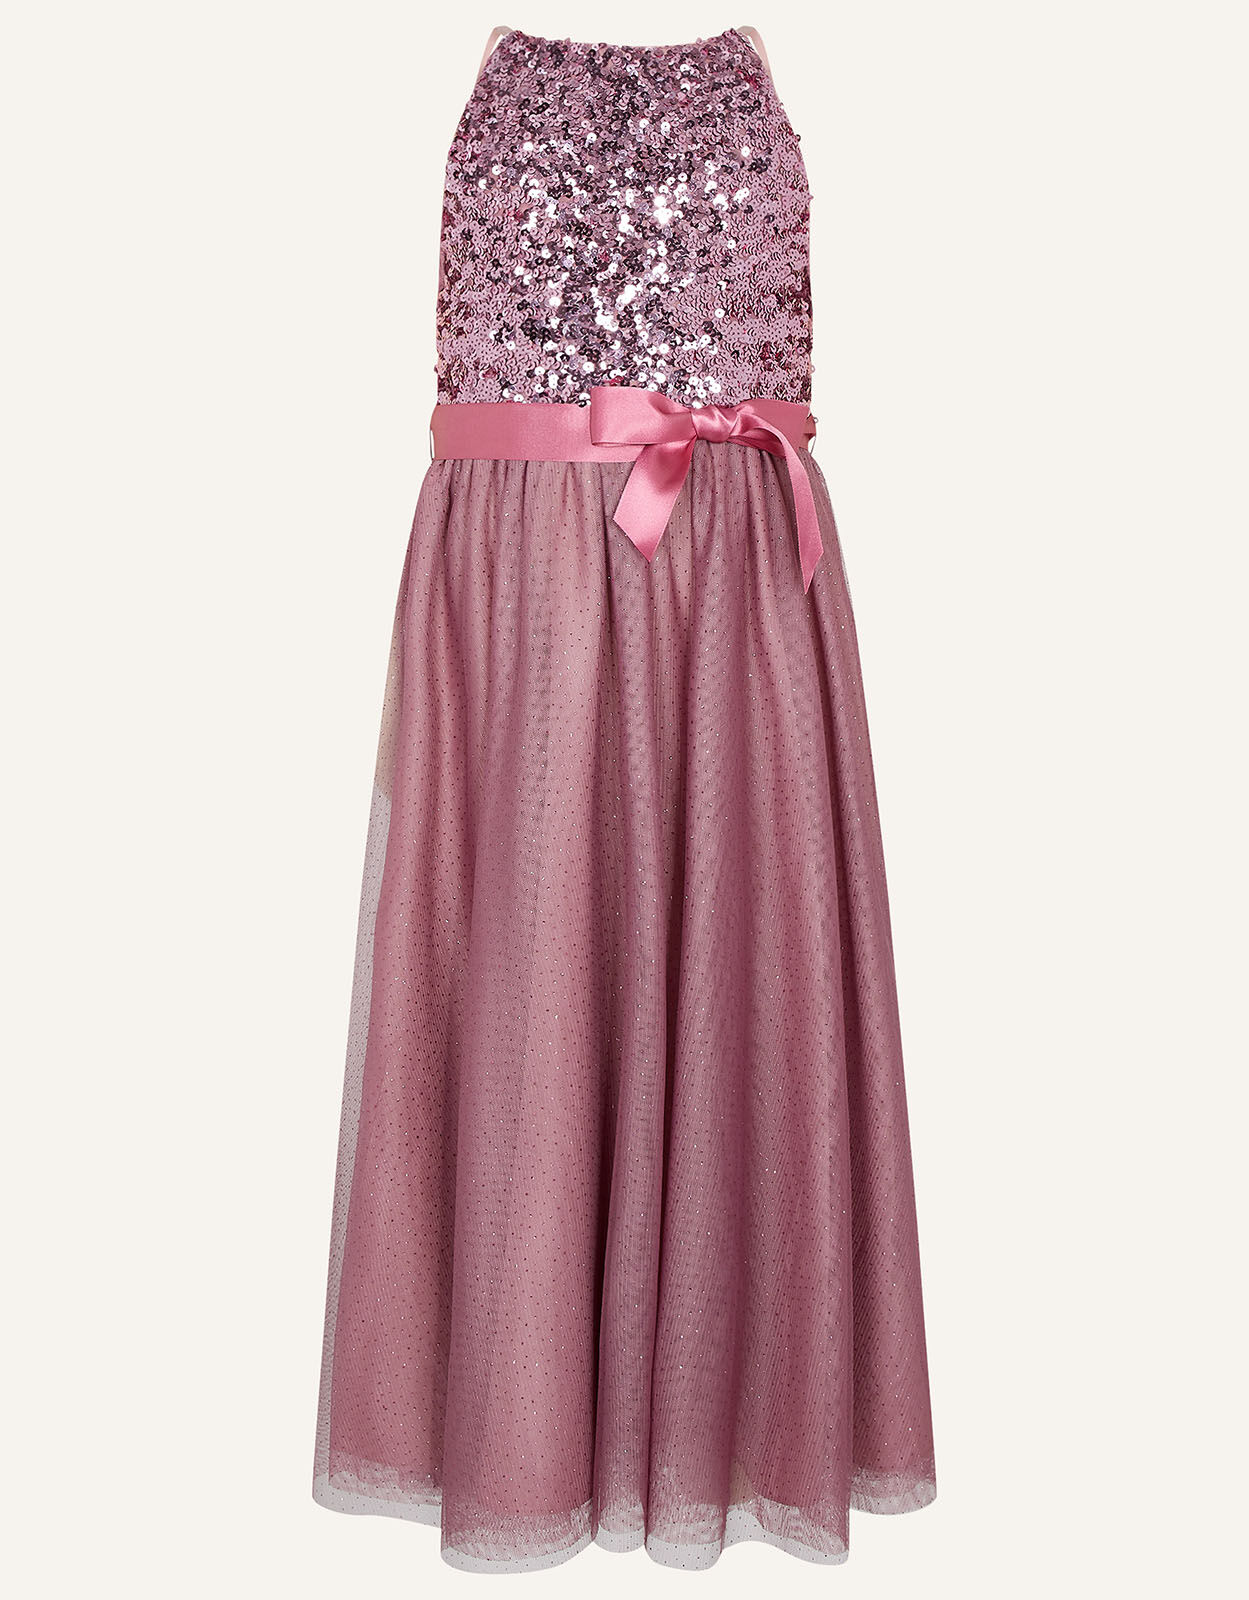 Monsoon Truth Sequin Dress in Recycled Polyester Pink